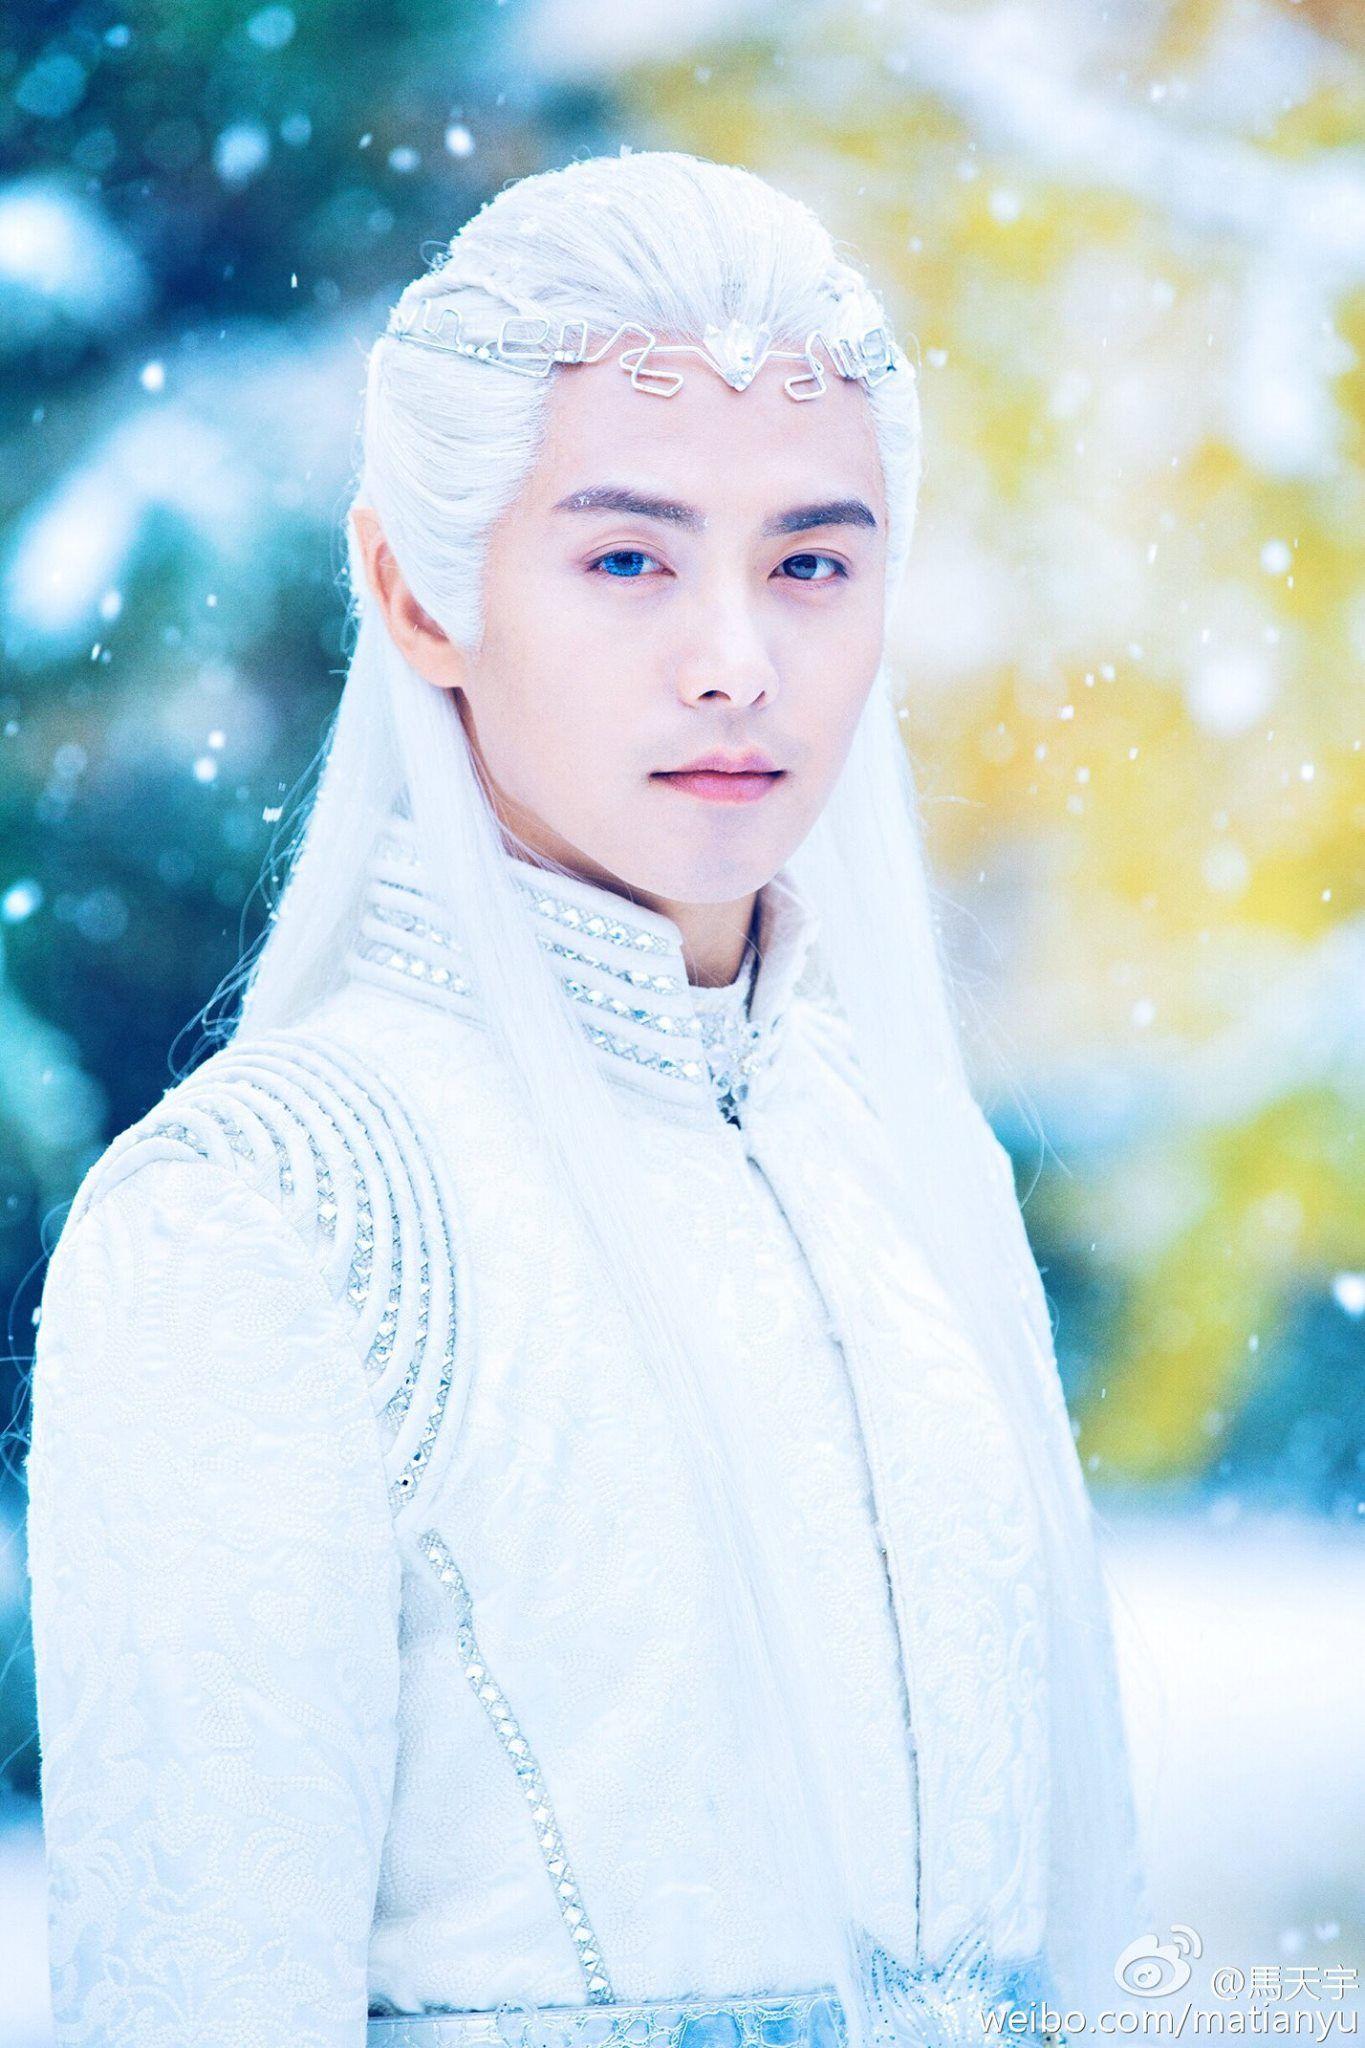 Ying Kong Shi. One eye looks bluer than the other. Ice Fantasy